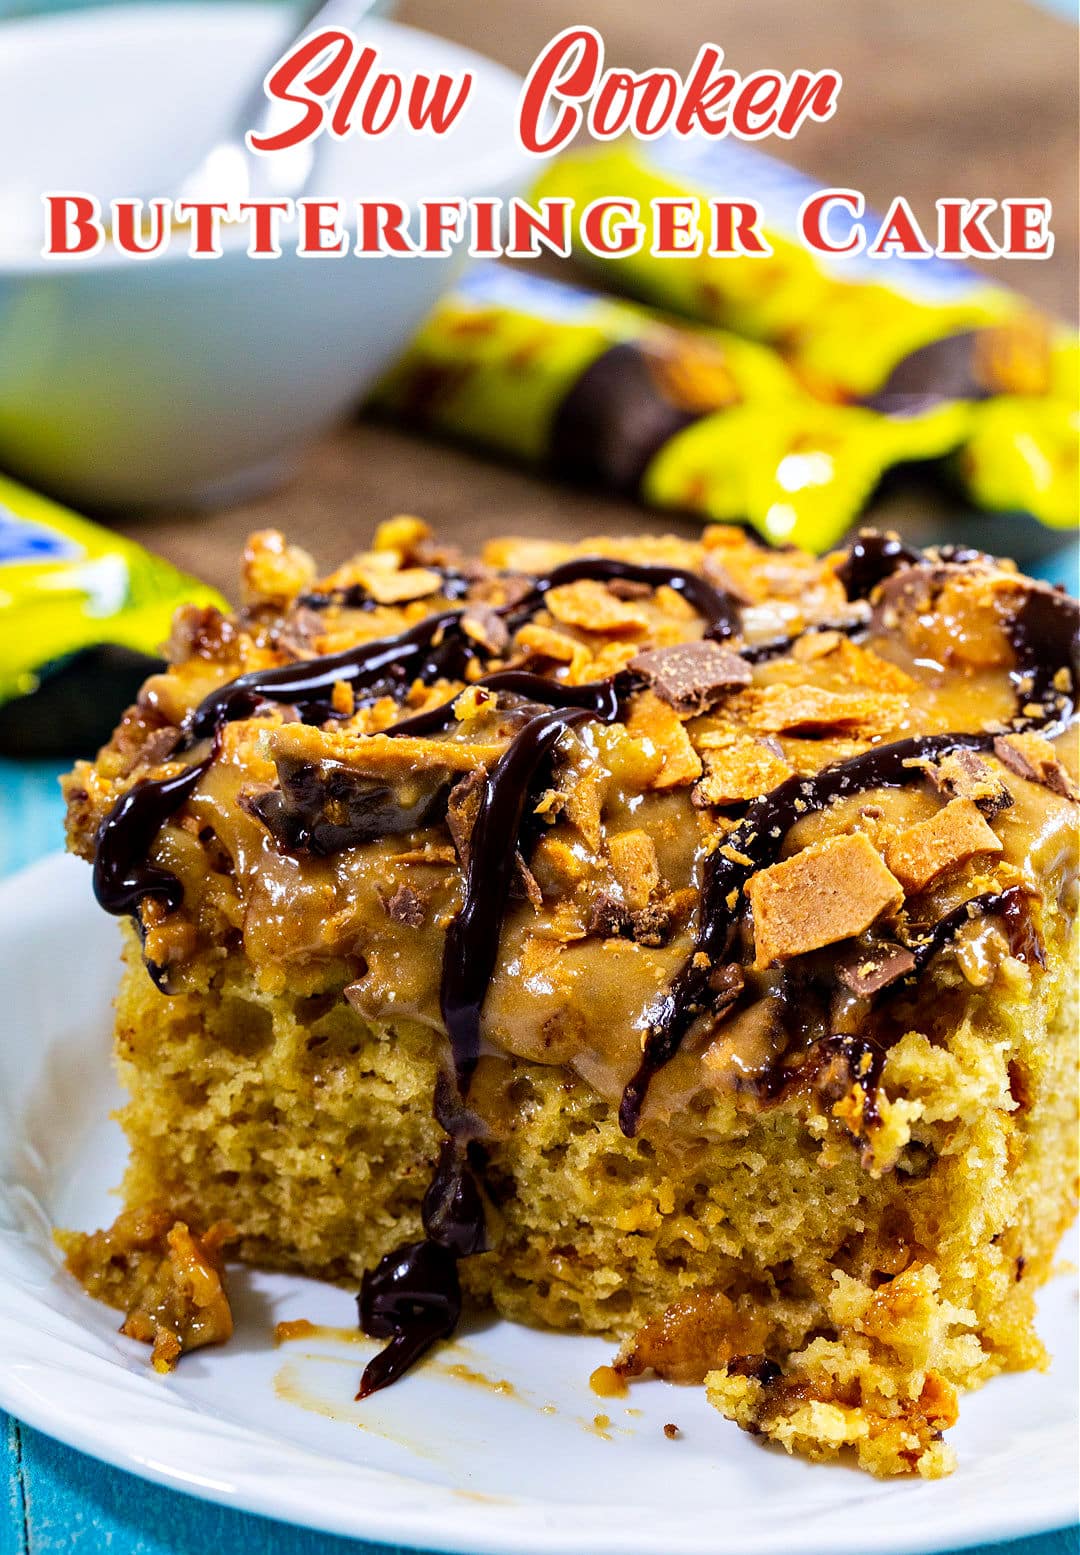 Square of Slow Cooker Butterfinger Cake on plate.